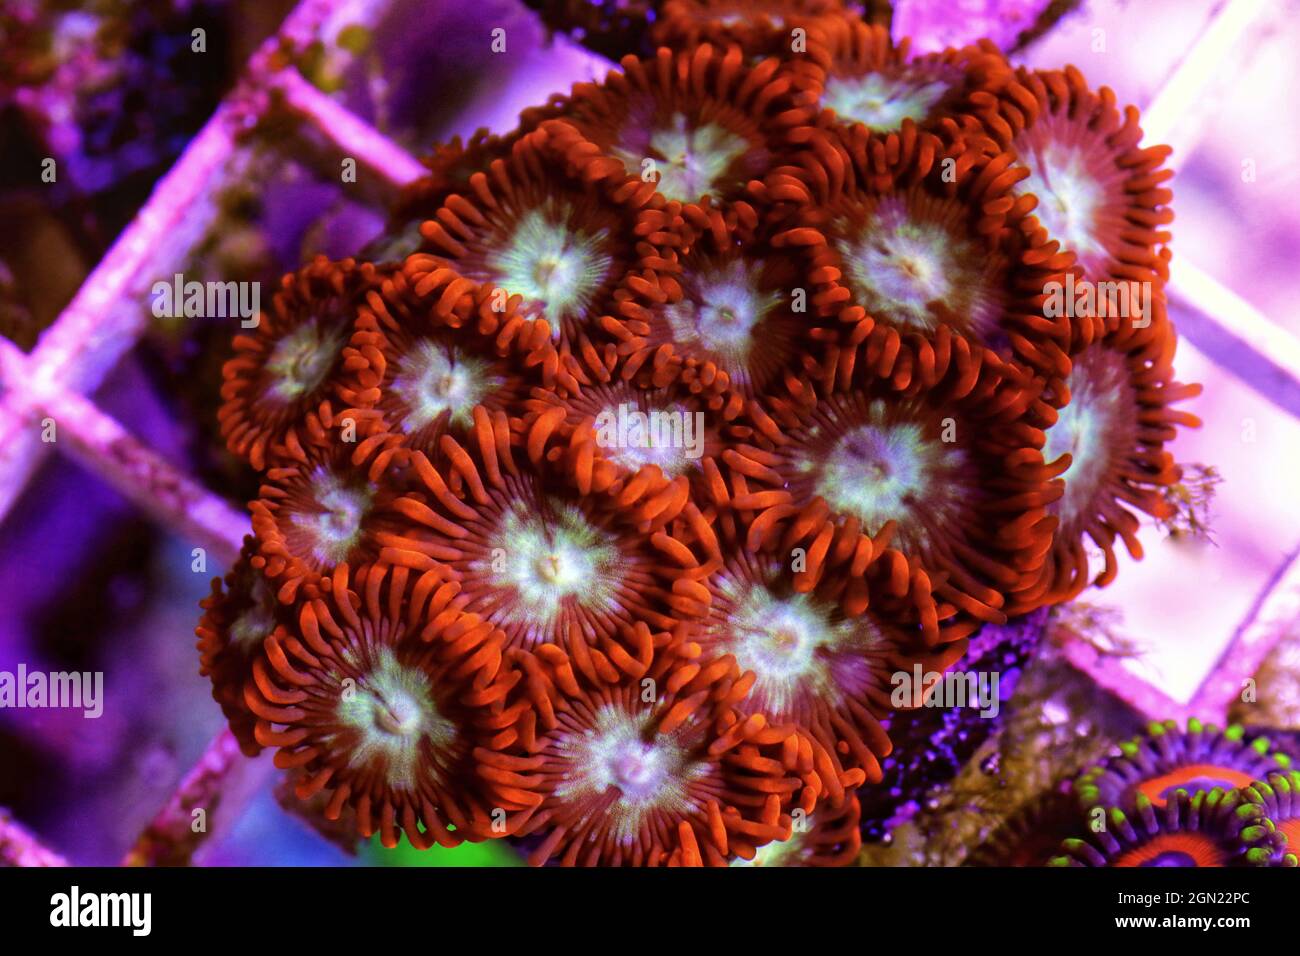 Small colony of Zoanthids in coral reef aquarium tank Stock Photo